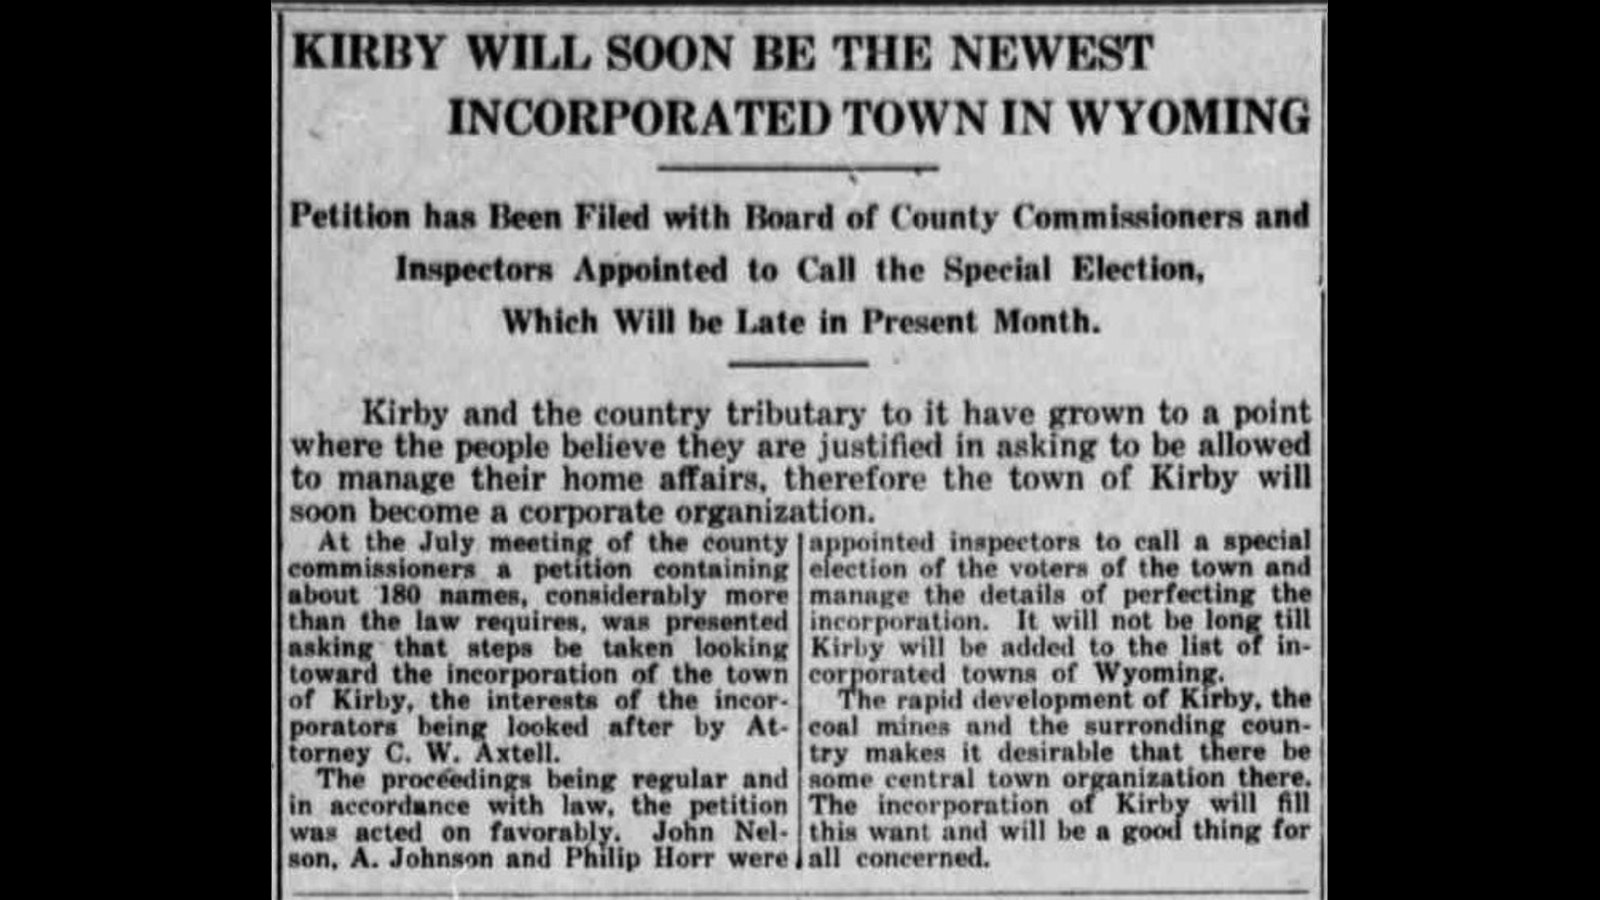 The Thermopolis Record published a story July 15, 1915, about the soon incorporation of the town of Kirby.